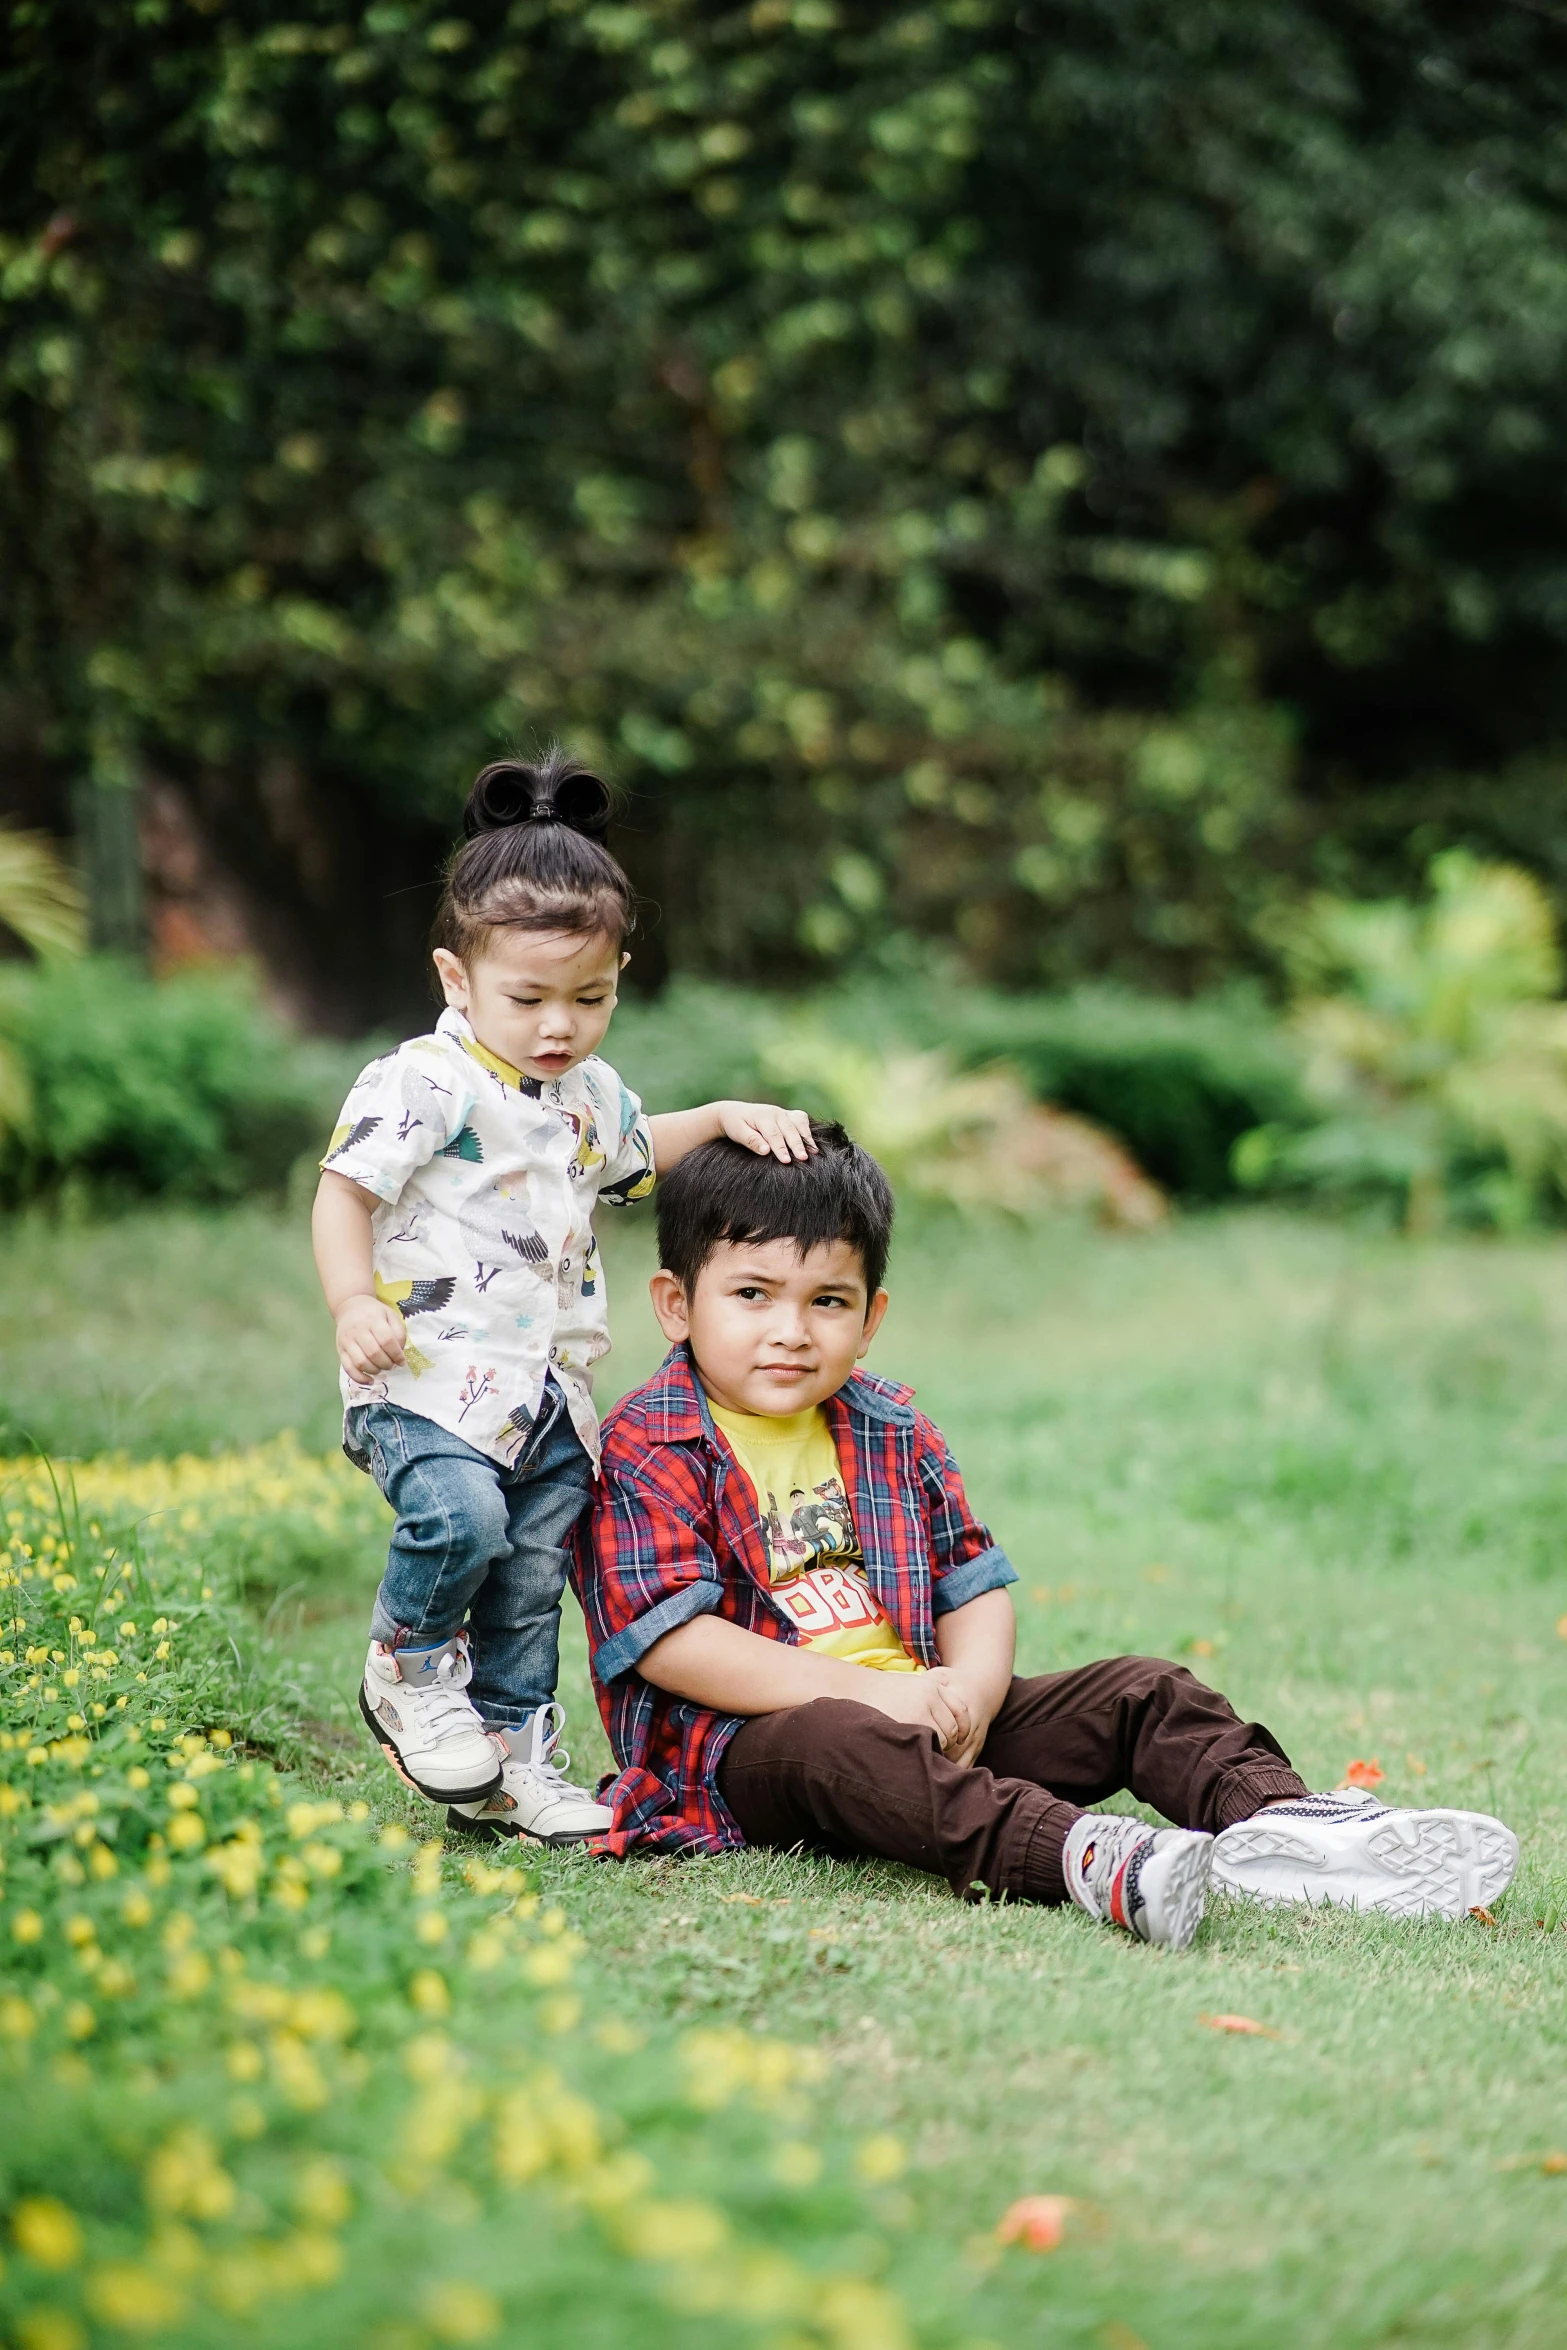 a boy sitting next to another small boy in the grass